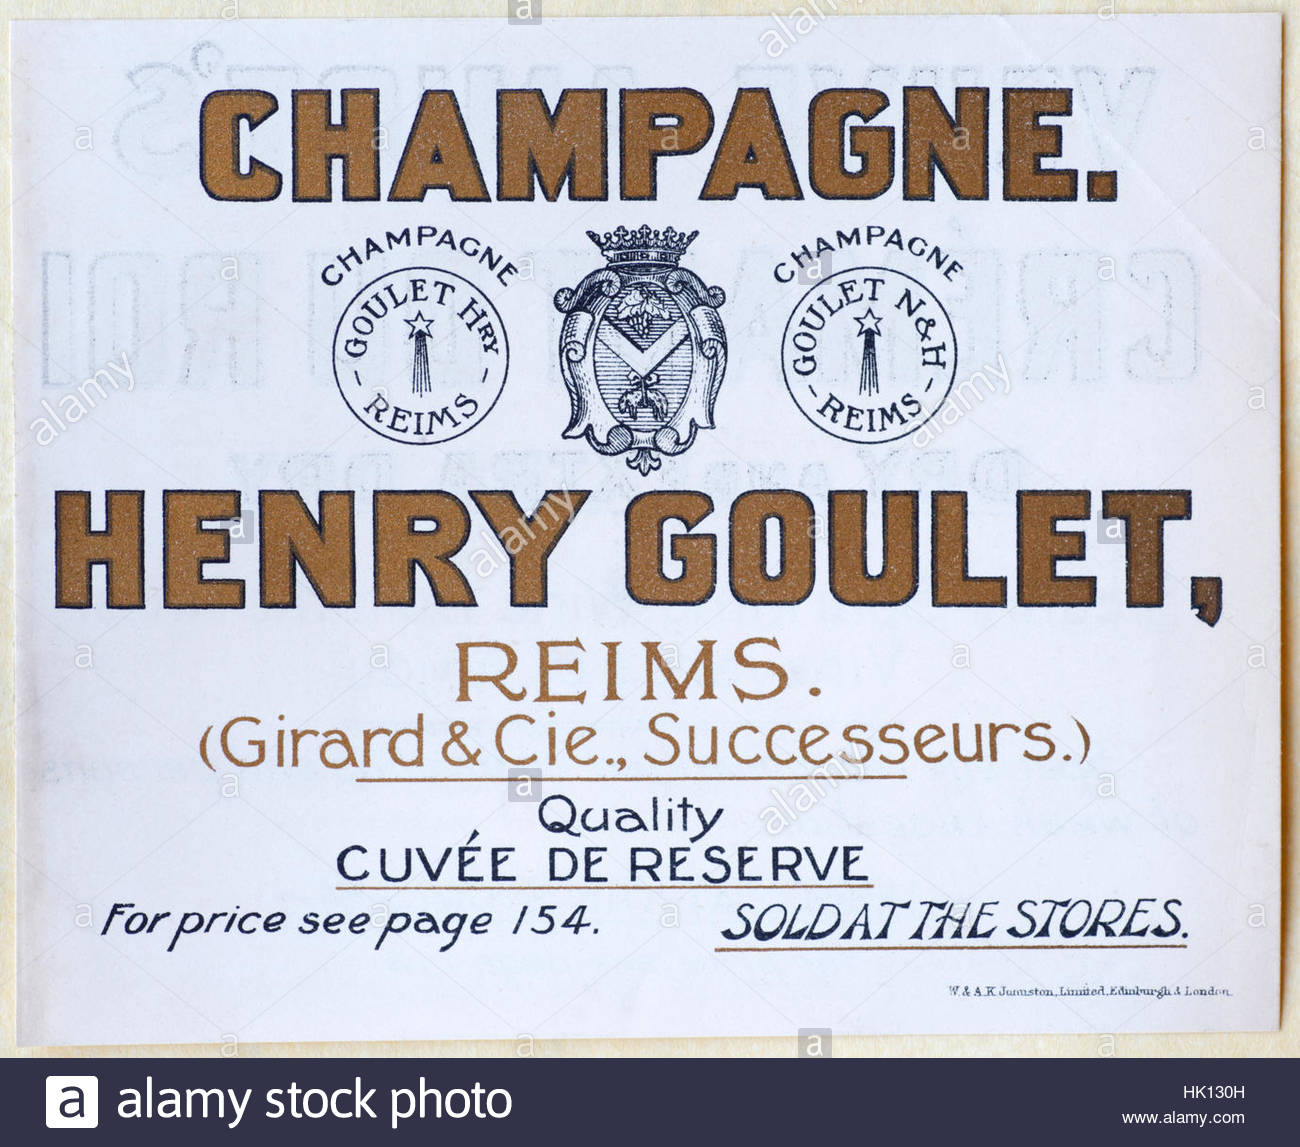 Champagne, Henry Goulet Reims, original vintage advertising from circa 1900 Stock Photo